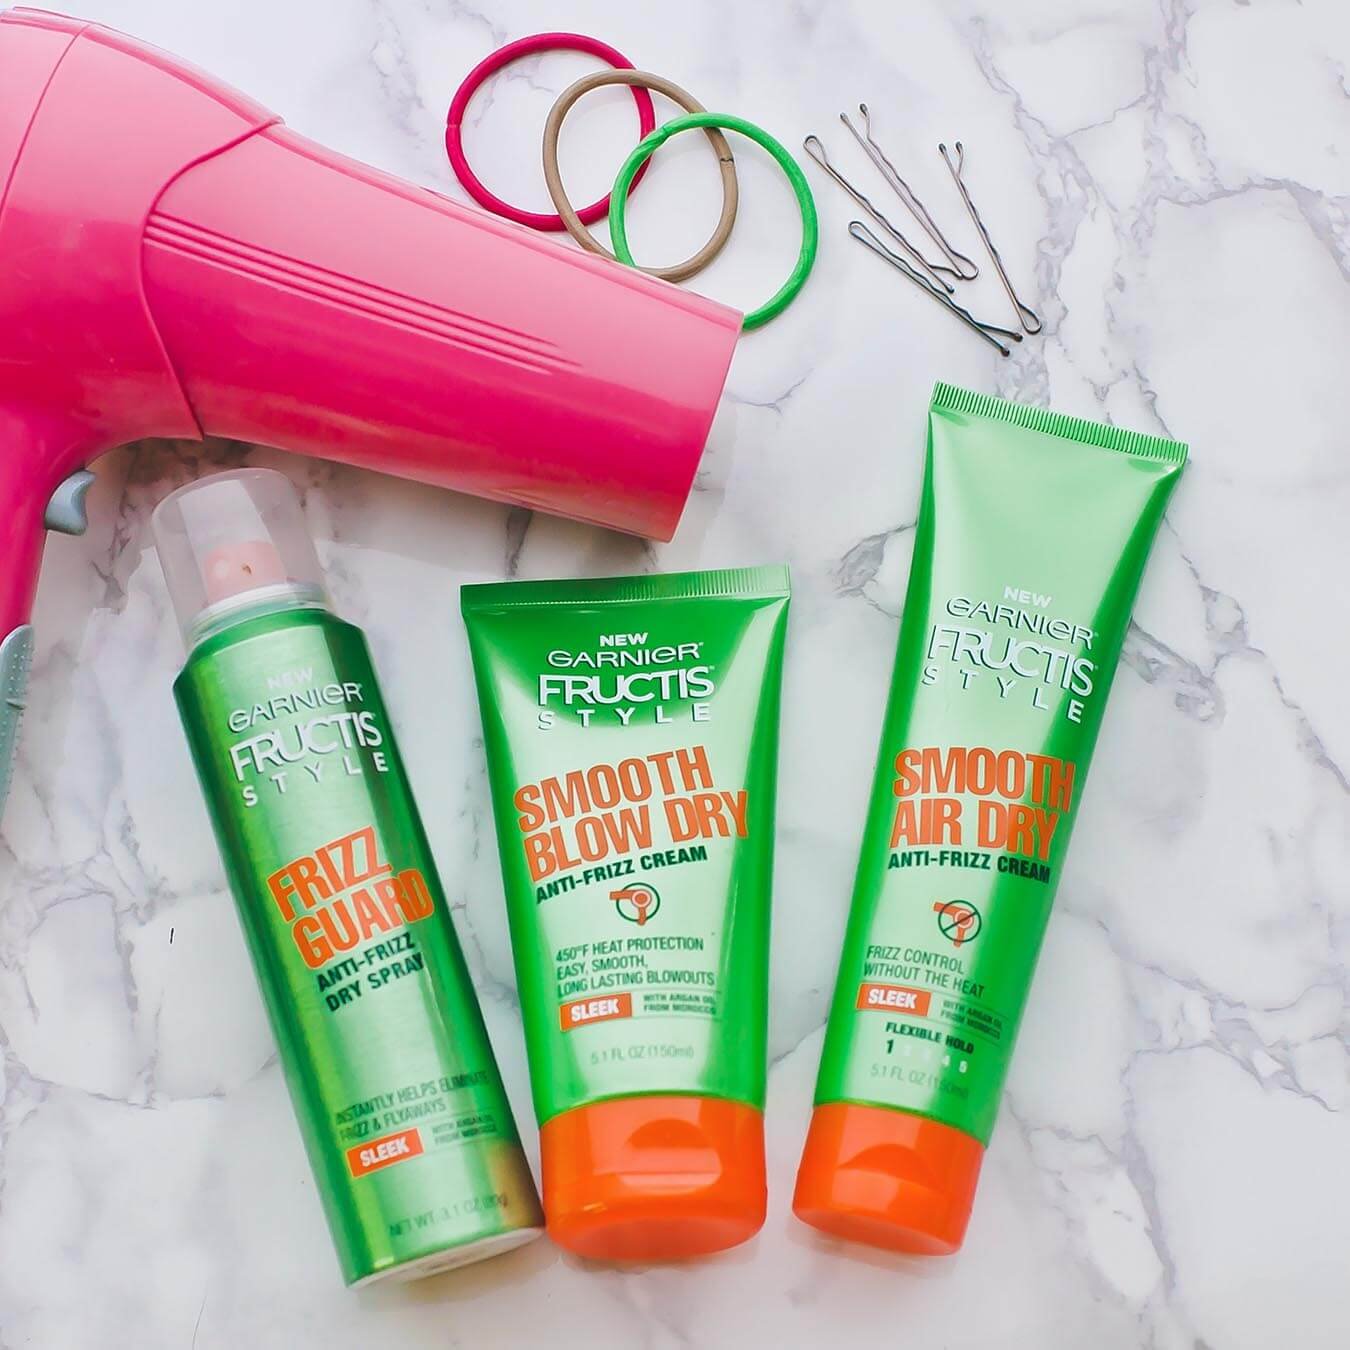 Garnier Fructis Style Frizz Guard Anti-Frizz Dry Spray, Fructis Style Smooth Blow Out Anti-Frizz Cream, and Fructis Style Smooth Air Dry Anti-Frizz Cream on white marble next to a pink blow dryer, four bobby pins, and three hair bands colored pink, brown, and green.